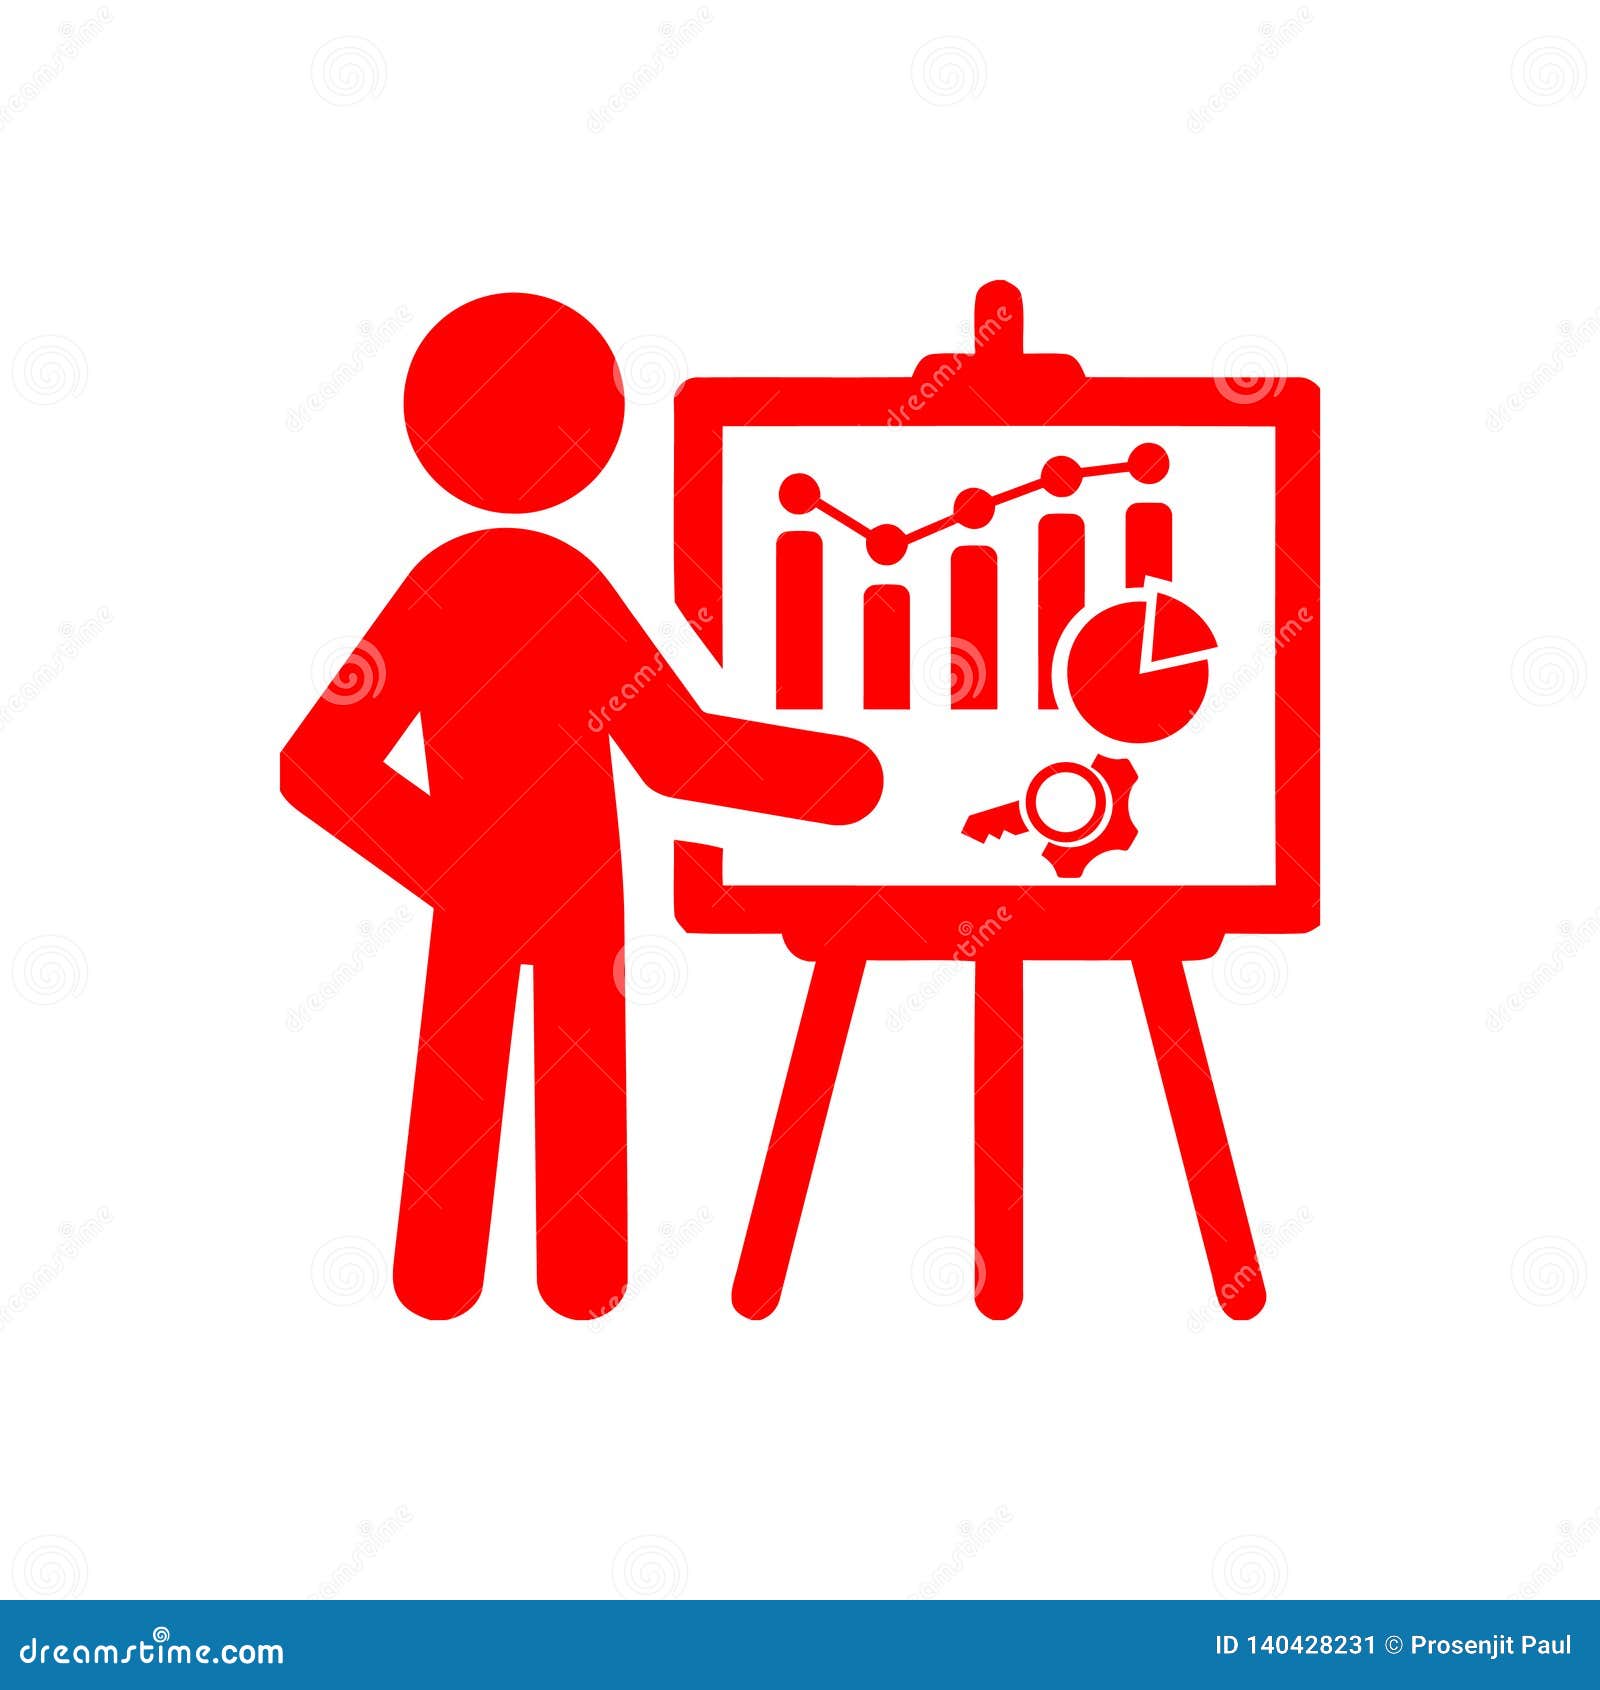 Business Keywords Research Analysis Red Icon Stock Vector Illustration Of Illustrationn Business